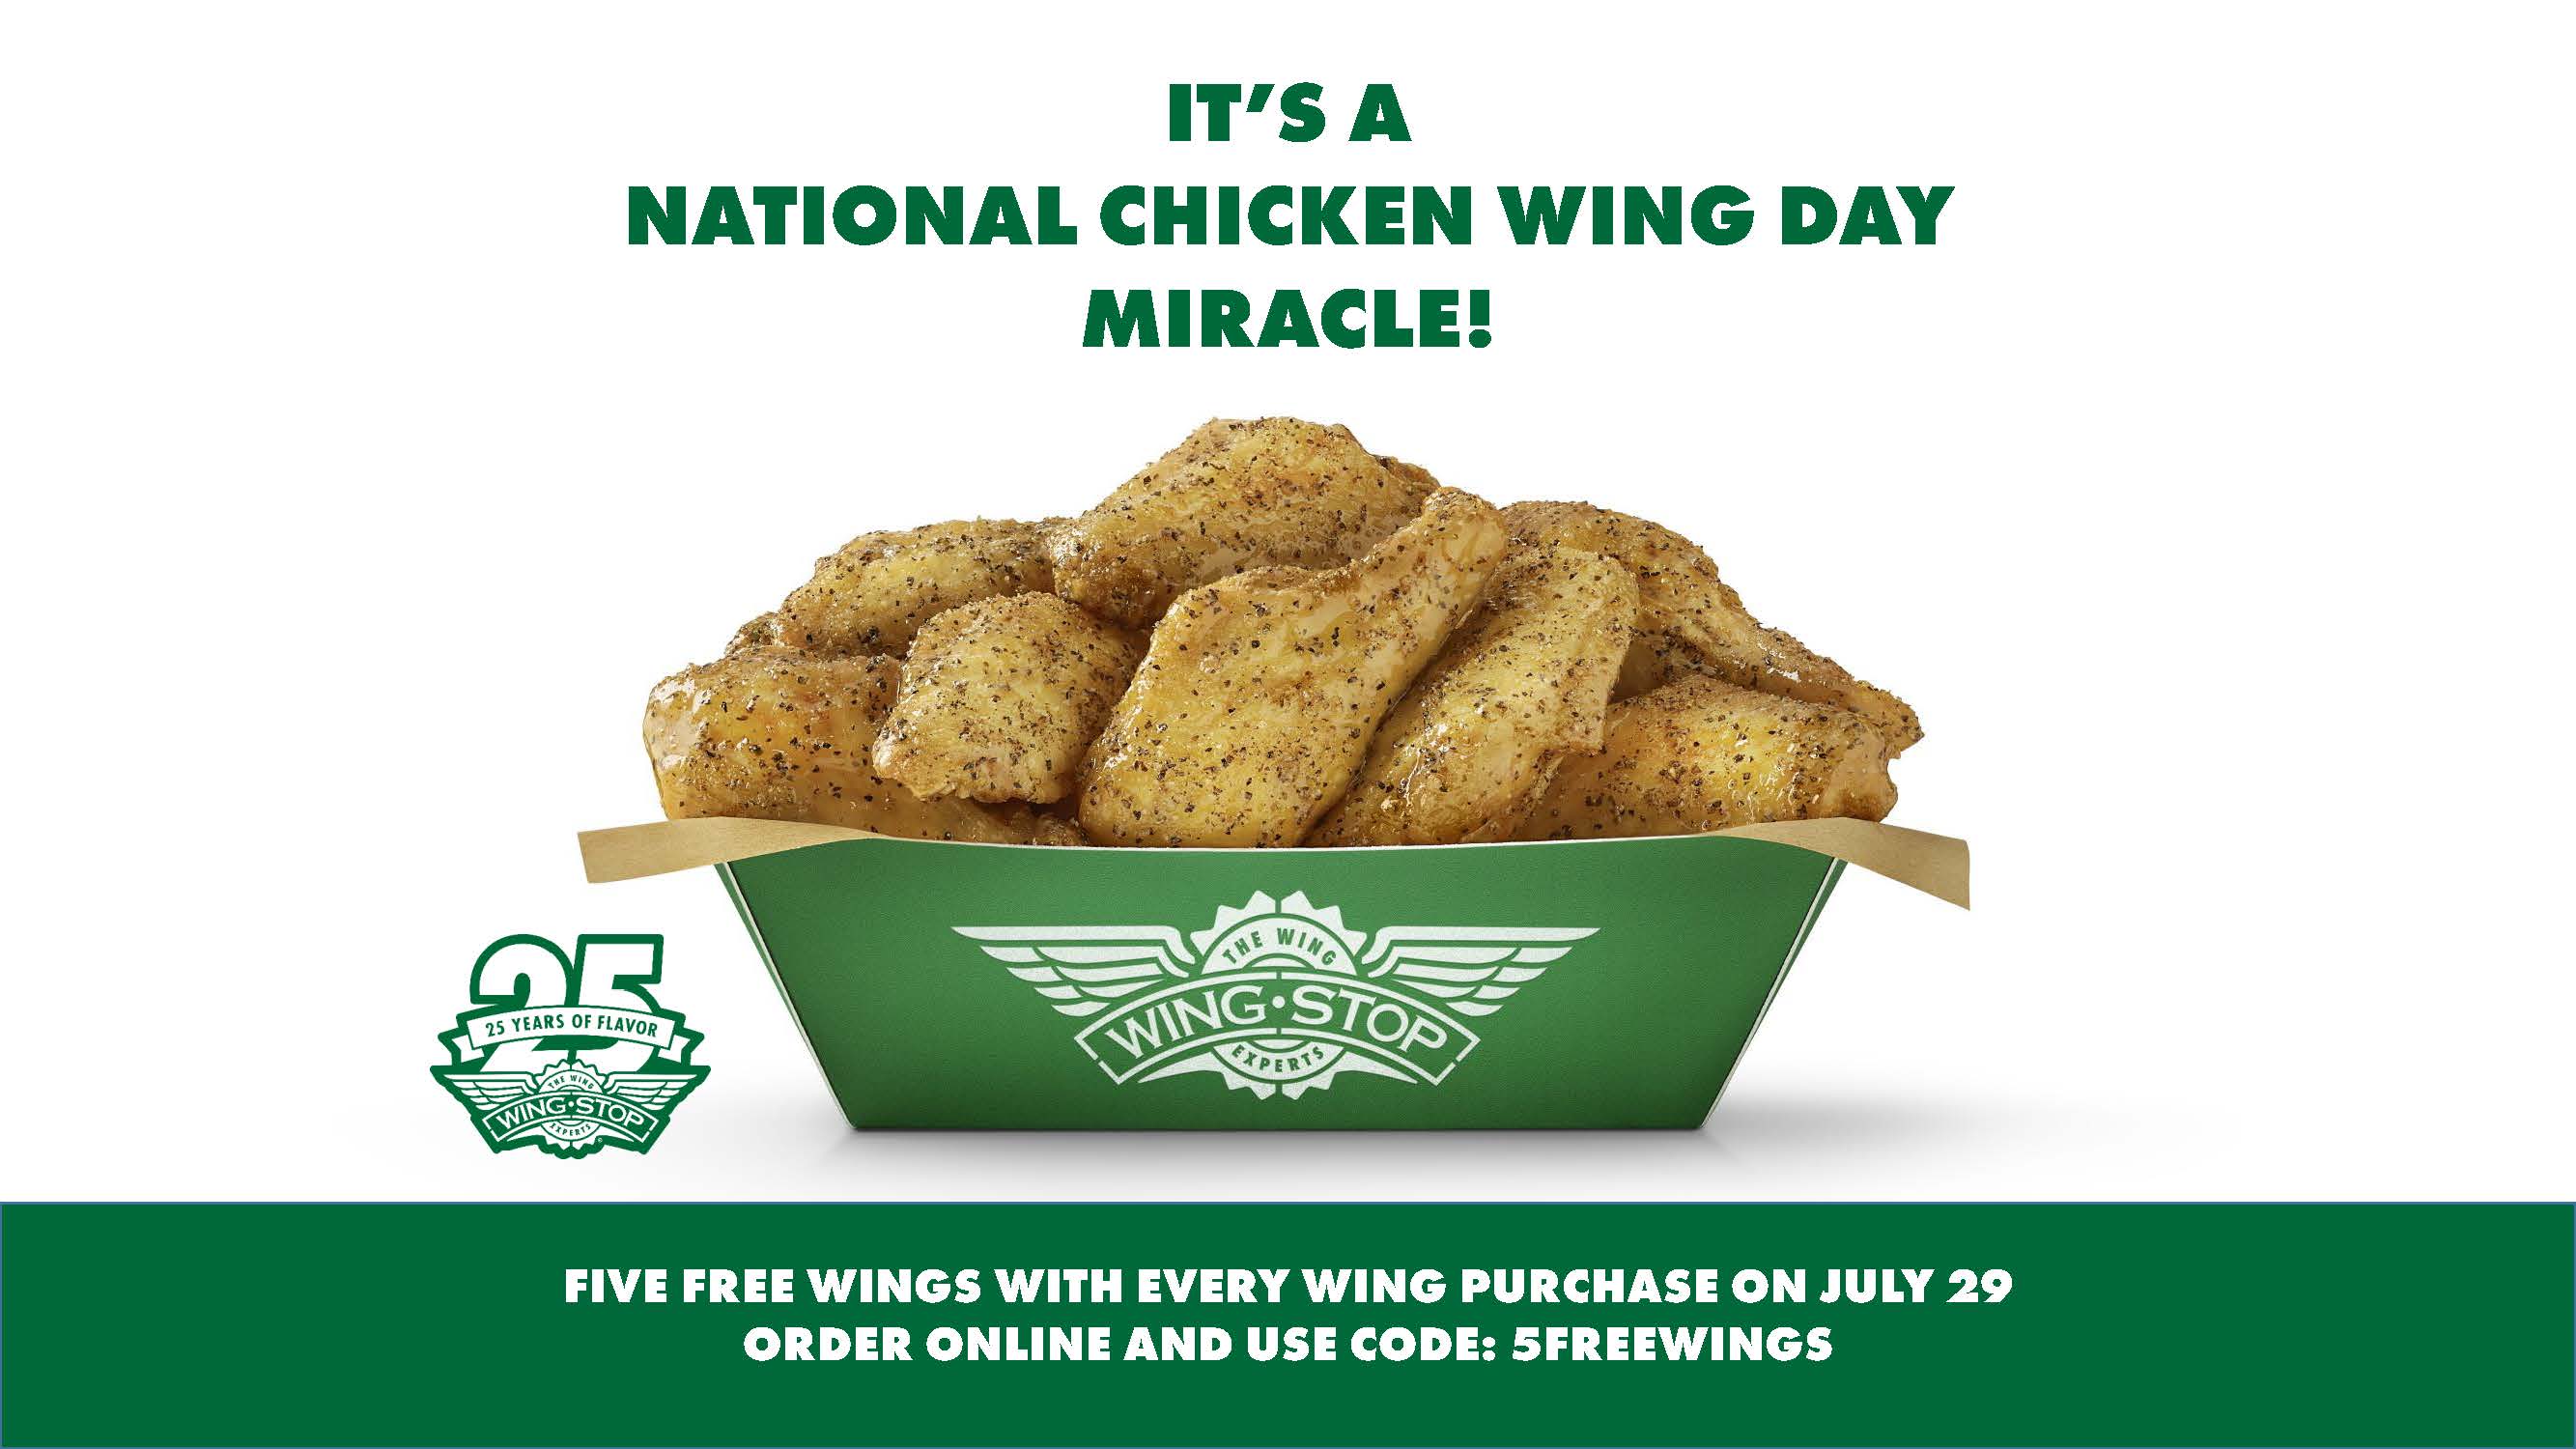 National Chicken Wing Day is the Best Day of the Year! WINGSIDER